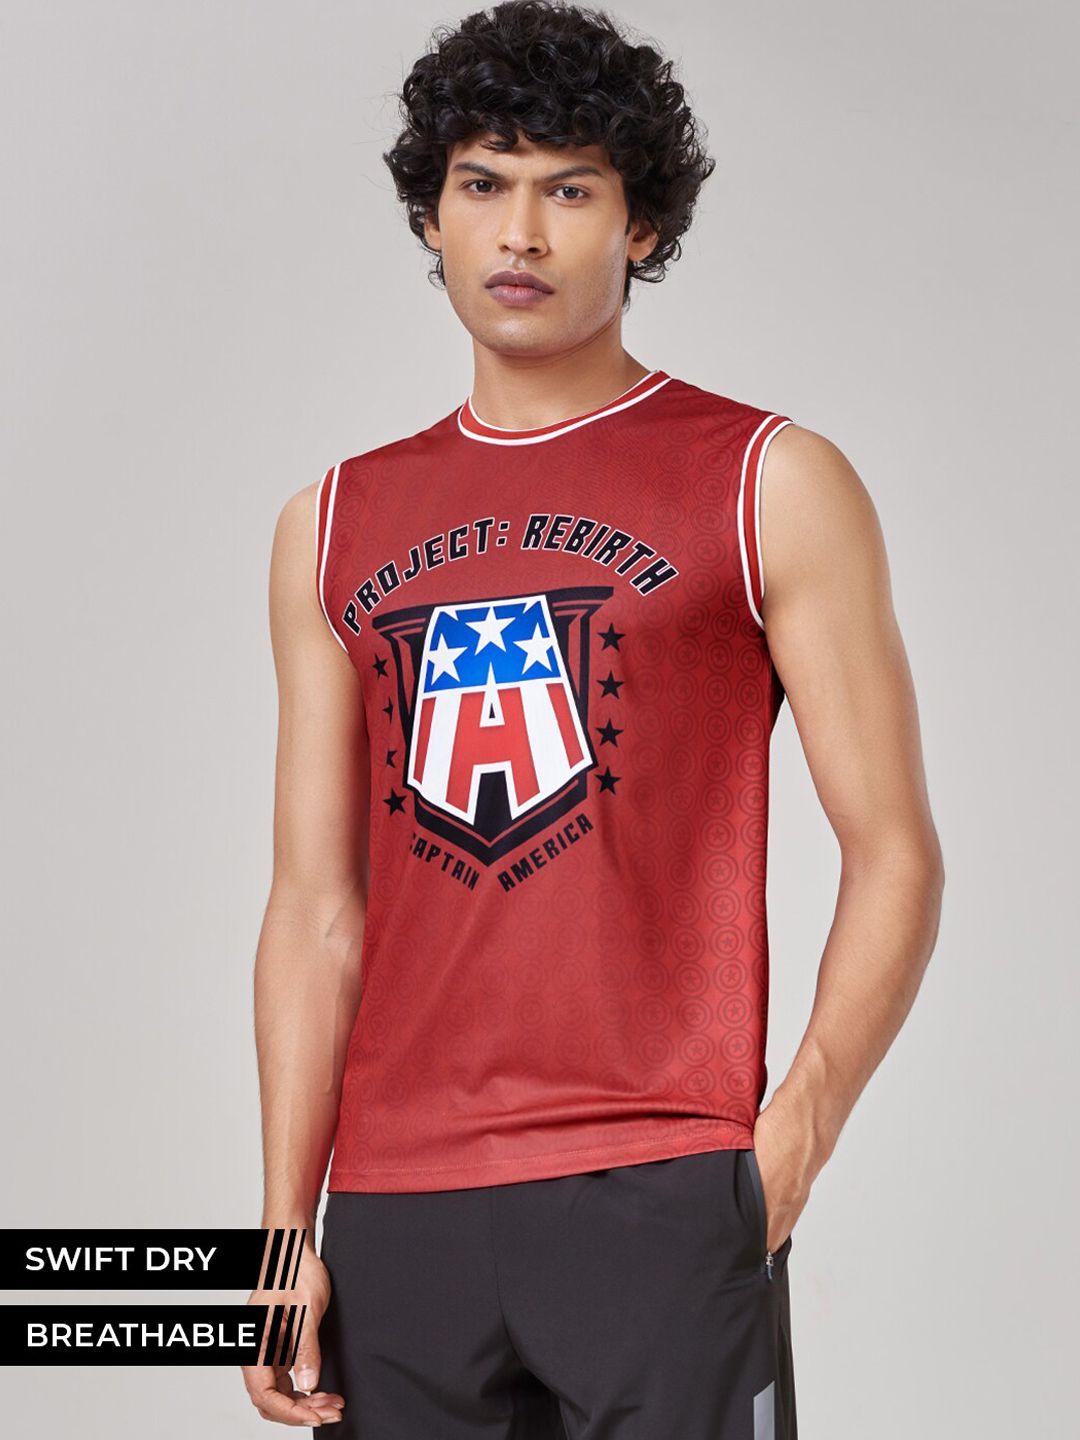 the-souled-store-men-red-&-blue-captain-america-printed-gym-vest